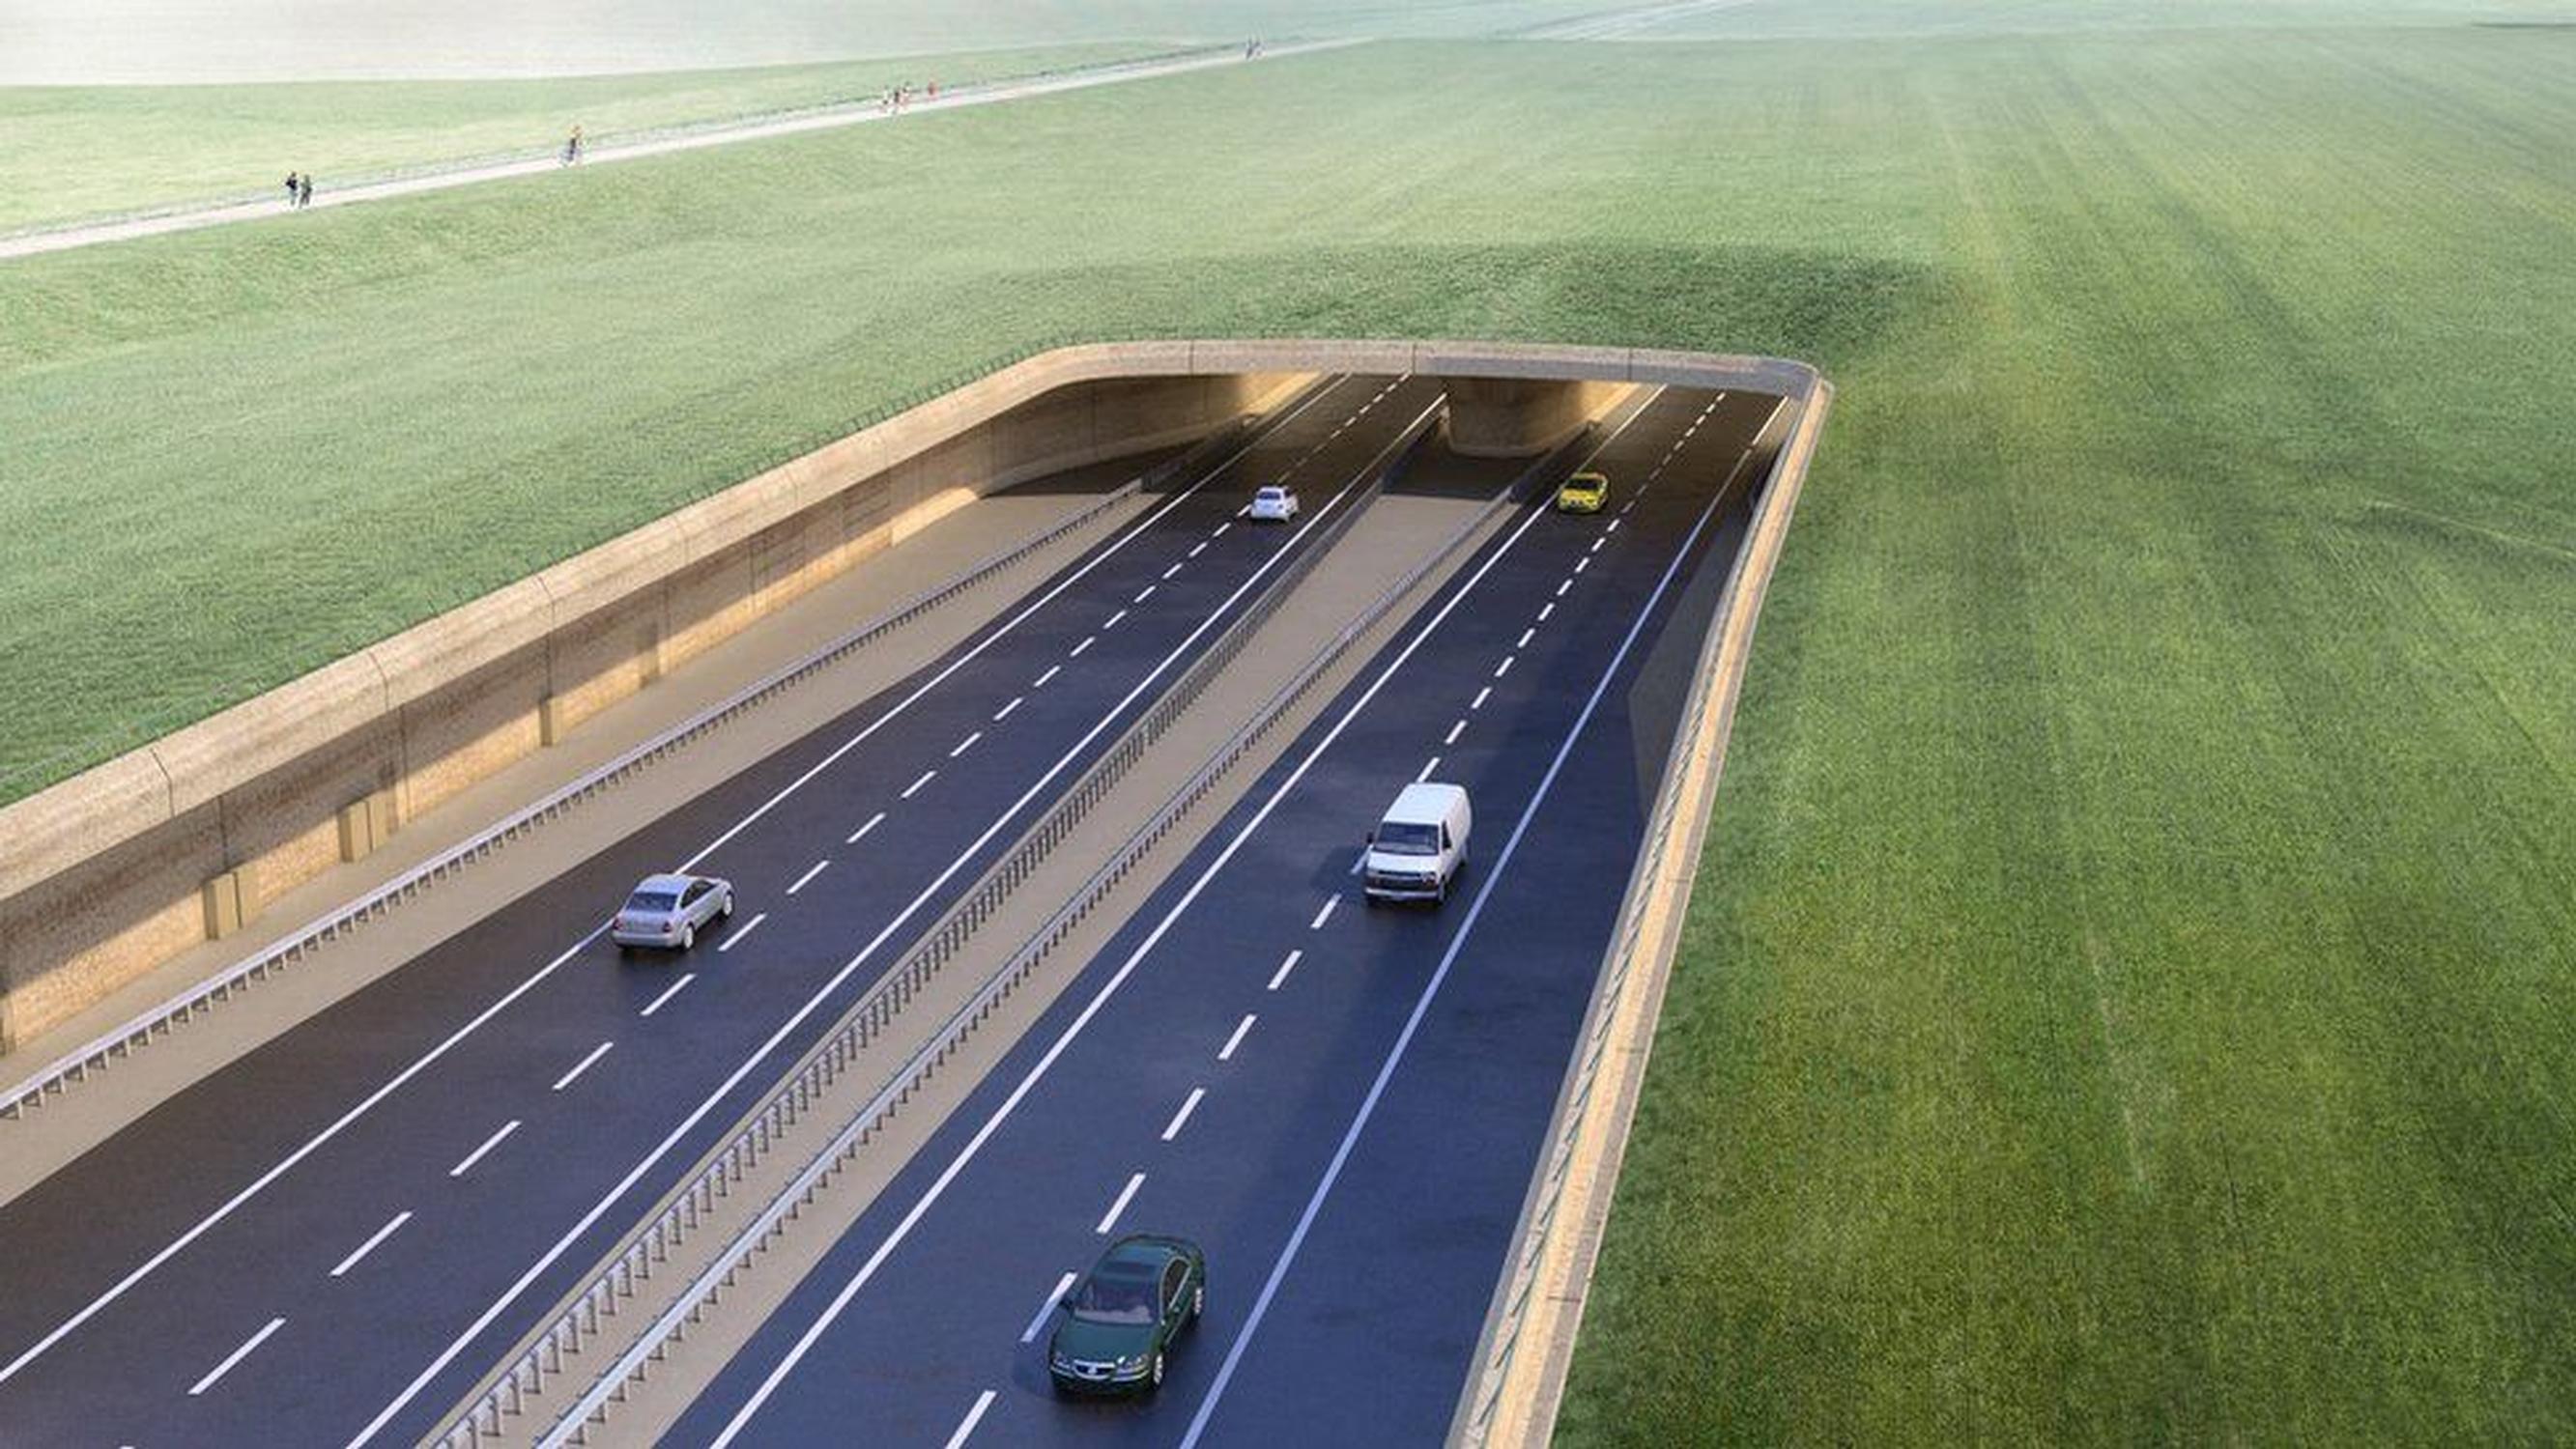 Design for the entrance for the proposed tunnel